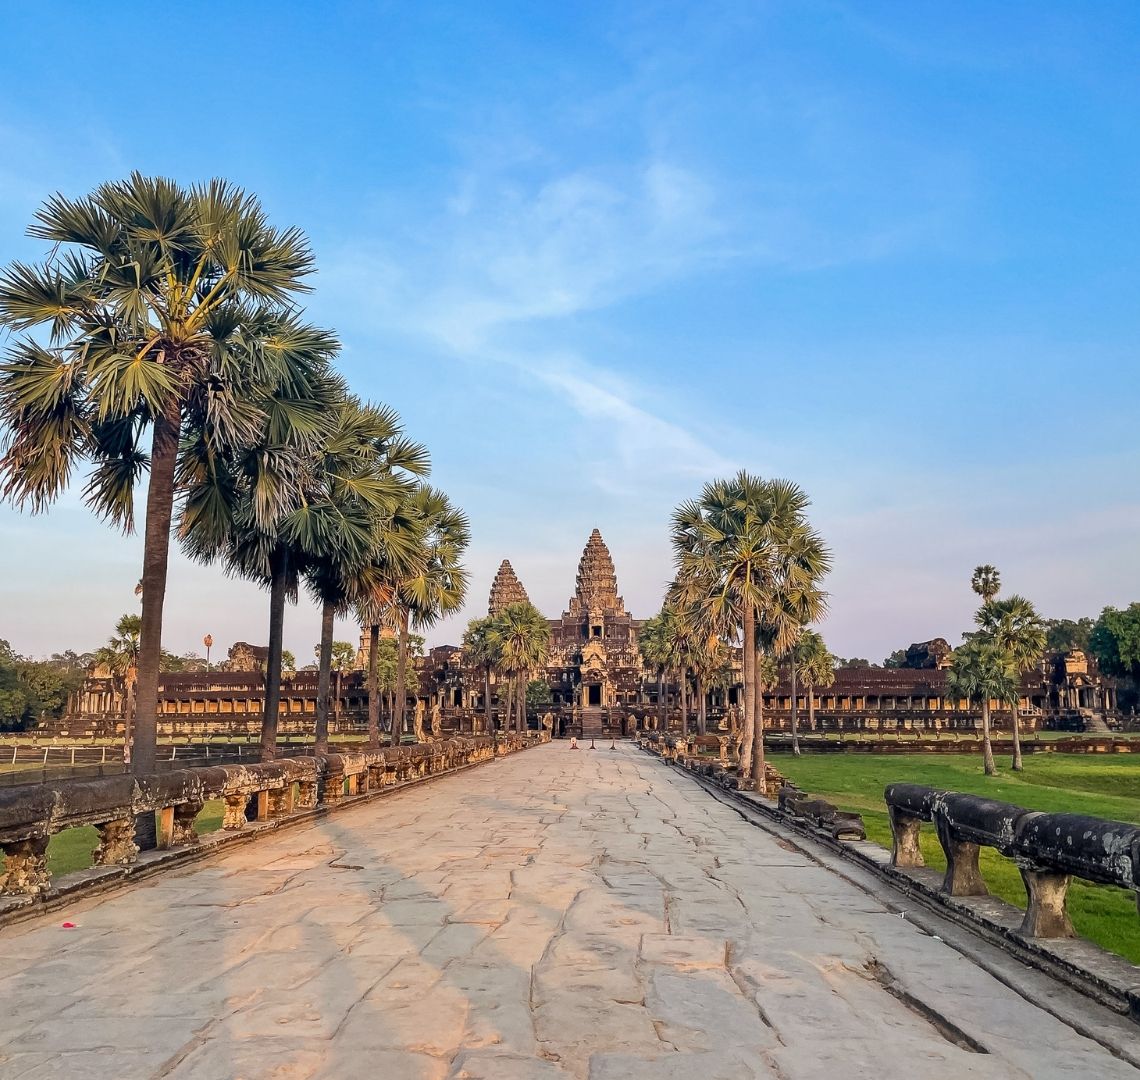 Angkor Wat at sunset with not a single person inside!